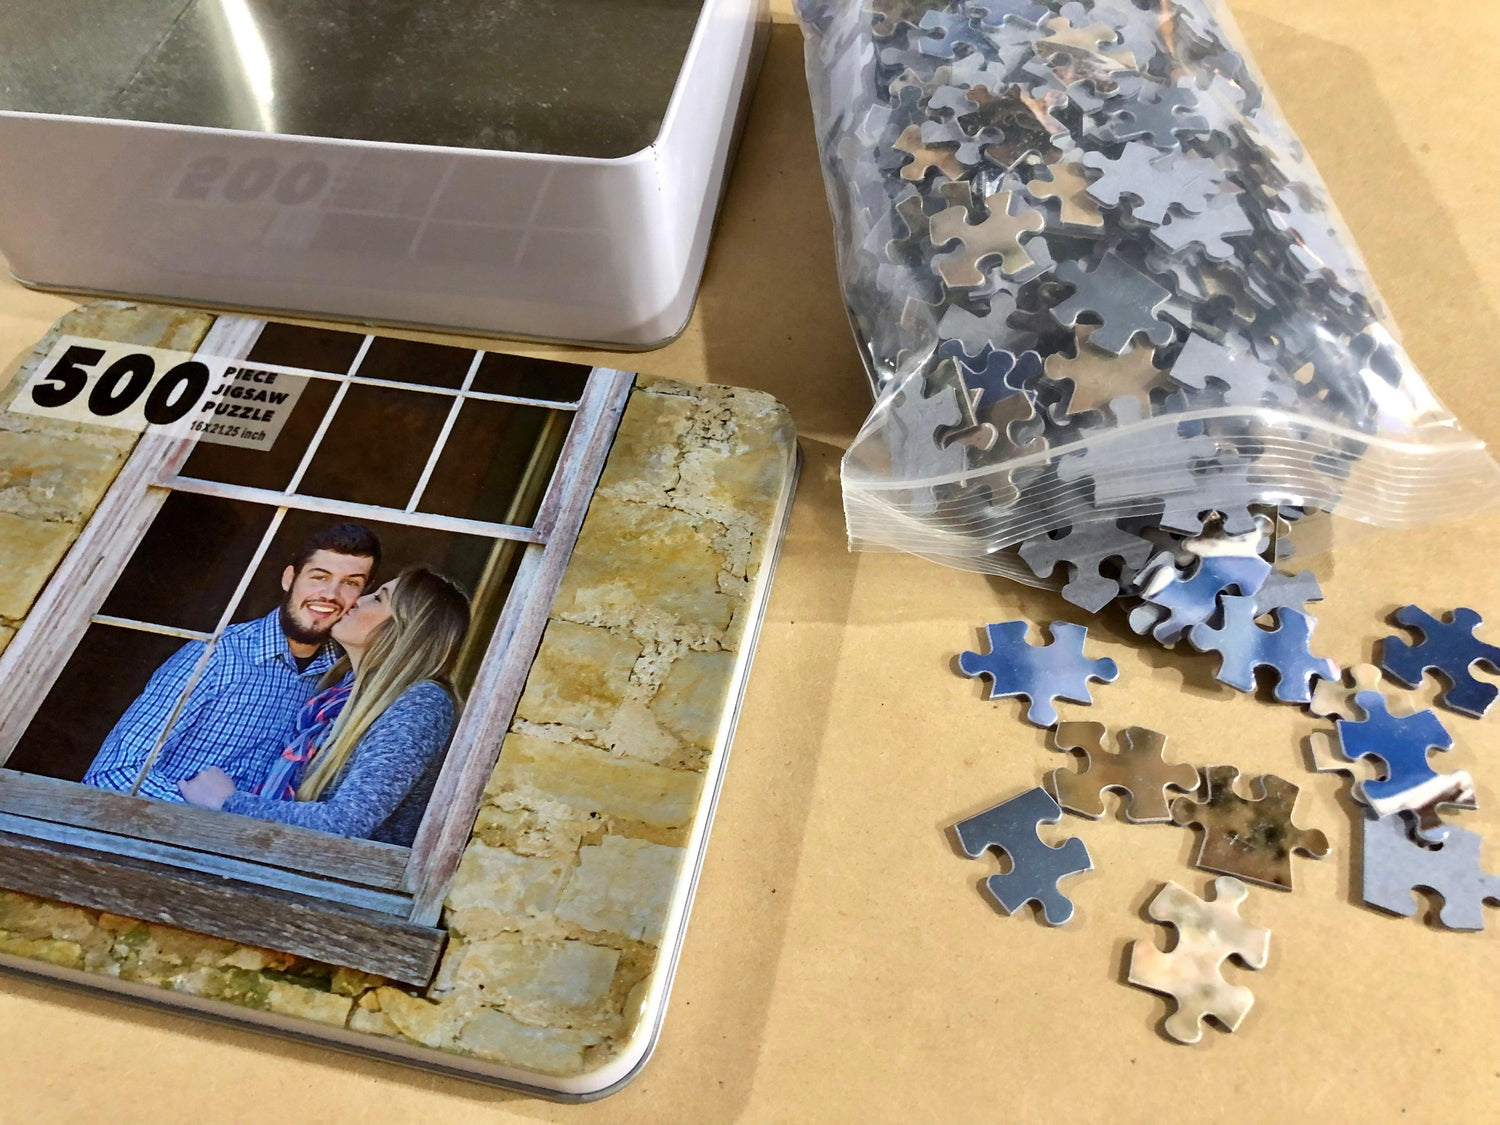 Custom 500 piece jigsaw puzzle with the puzzle pieces laid out to show the quality of the personalized jigsaw puzzle.